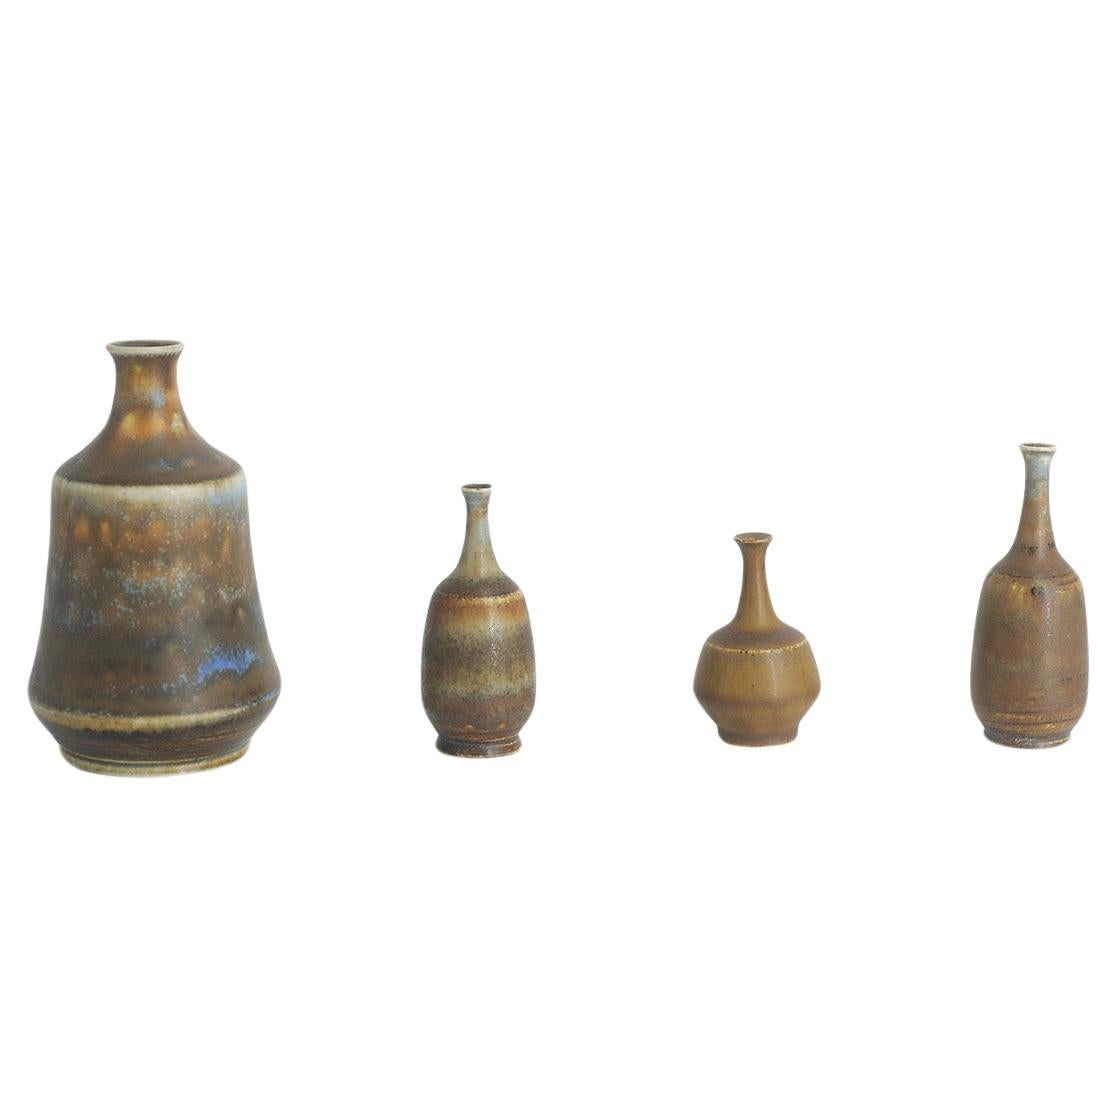 Set of 4 Small Mid-Century Scandinavian Modern Collectible Brown Stoneware Vases